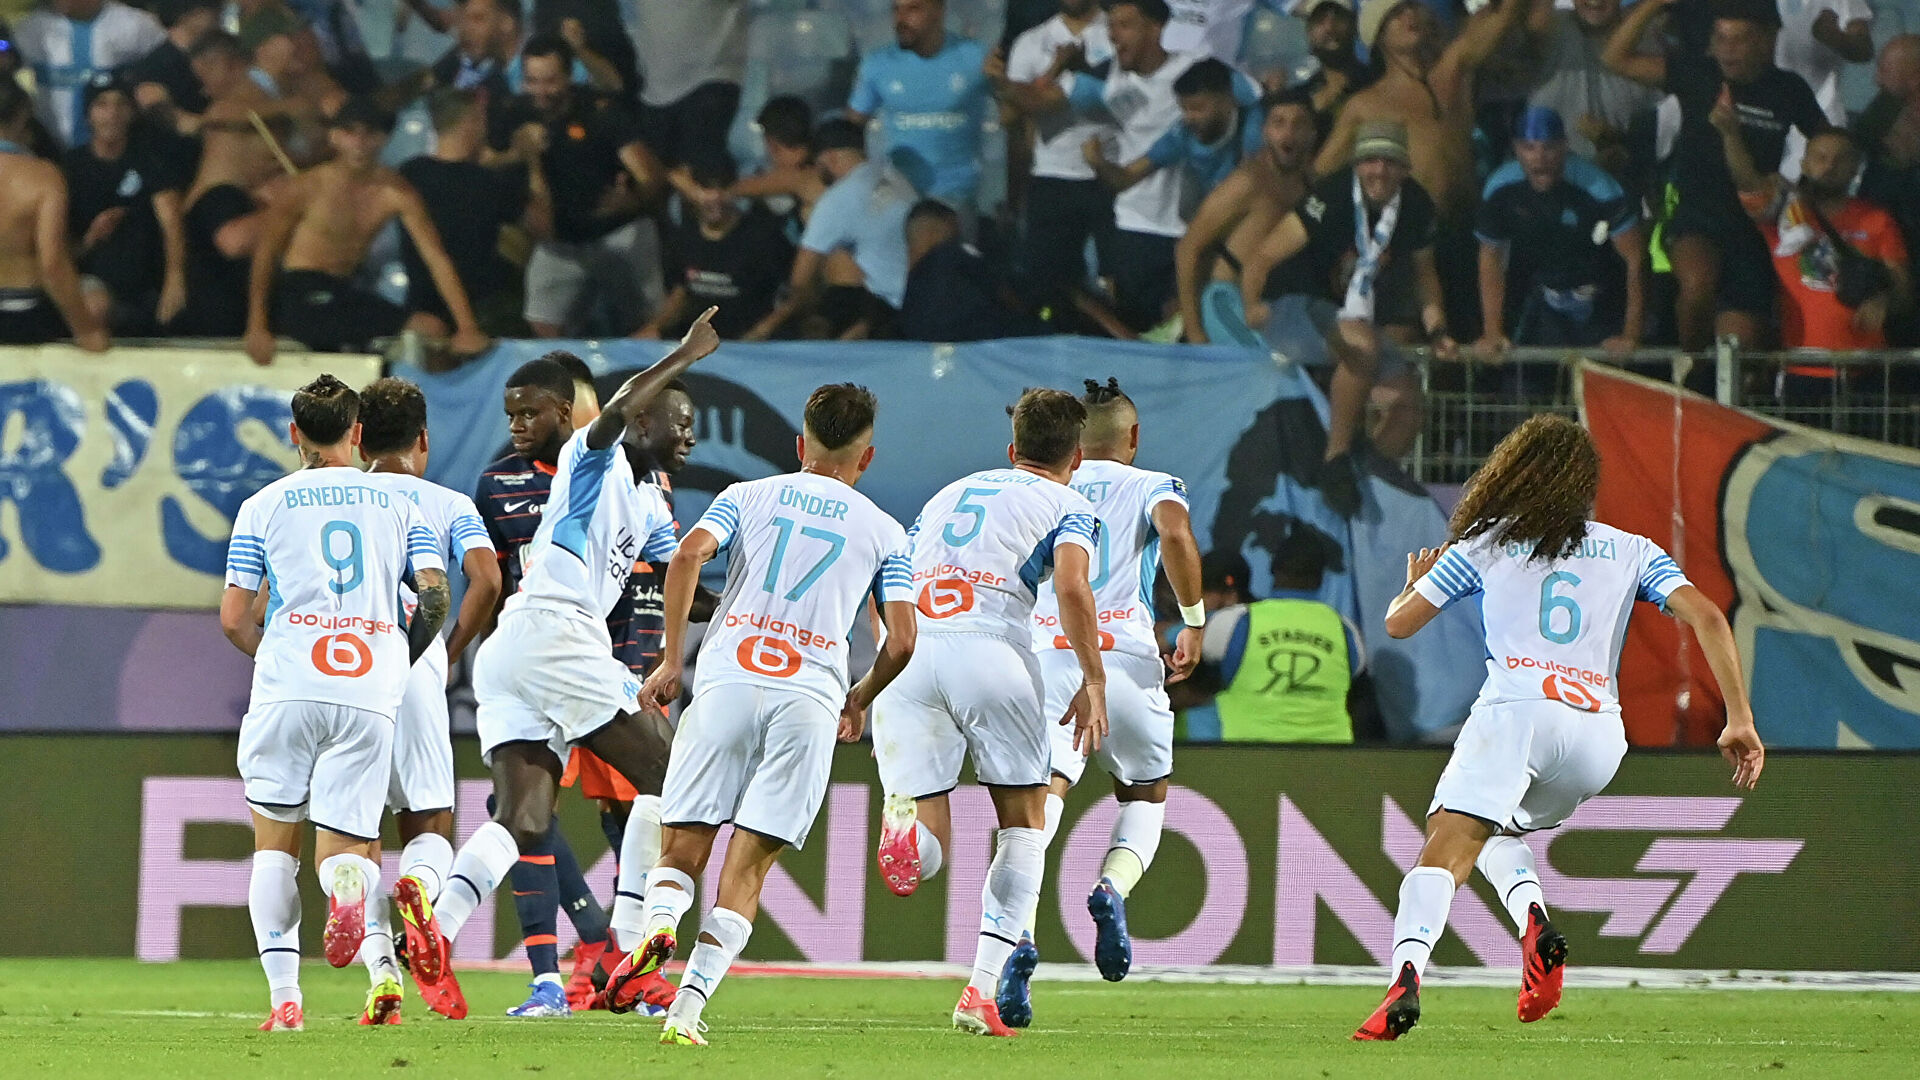 Marseille vs montpellier betting preview goal stratford horse racing betting strategy